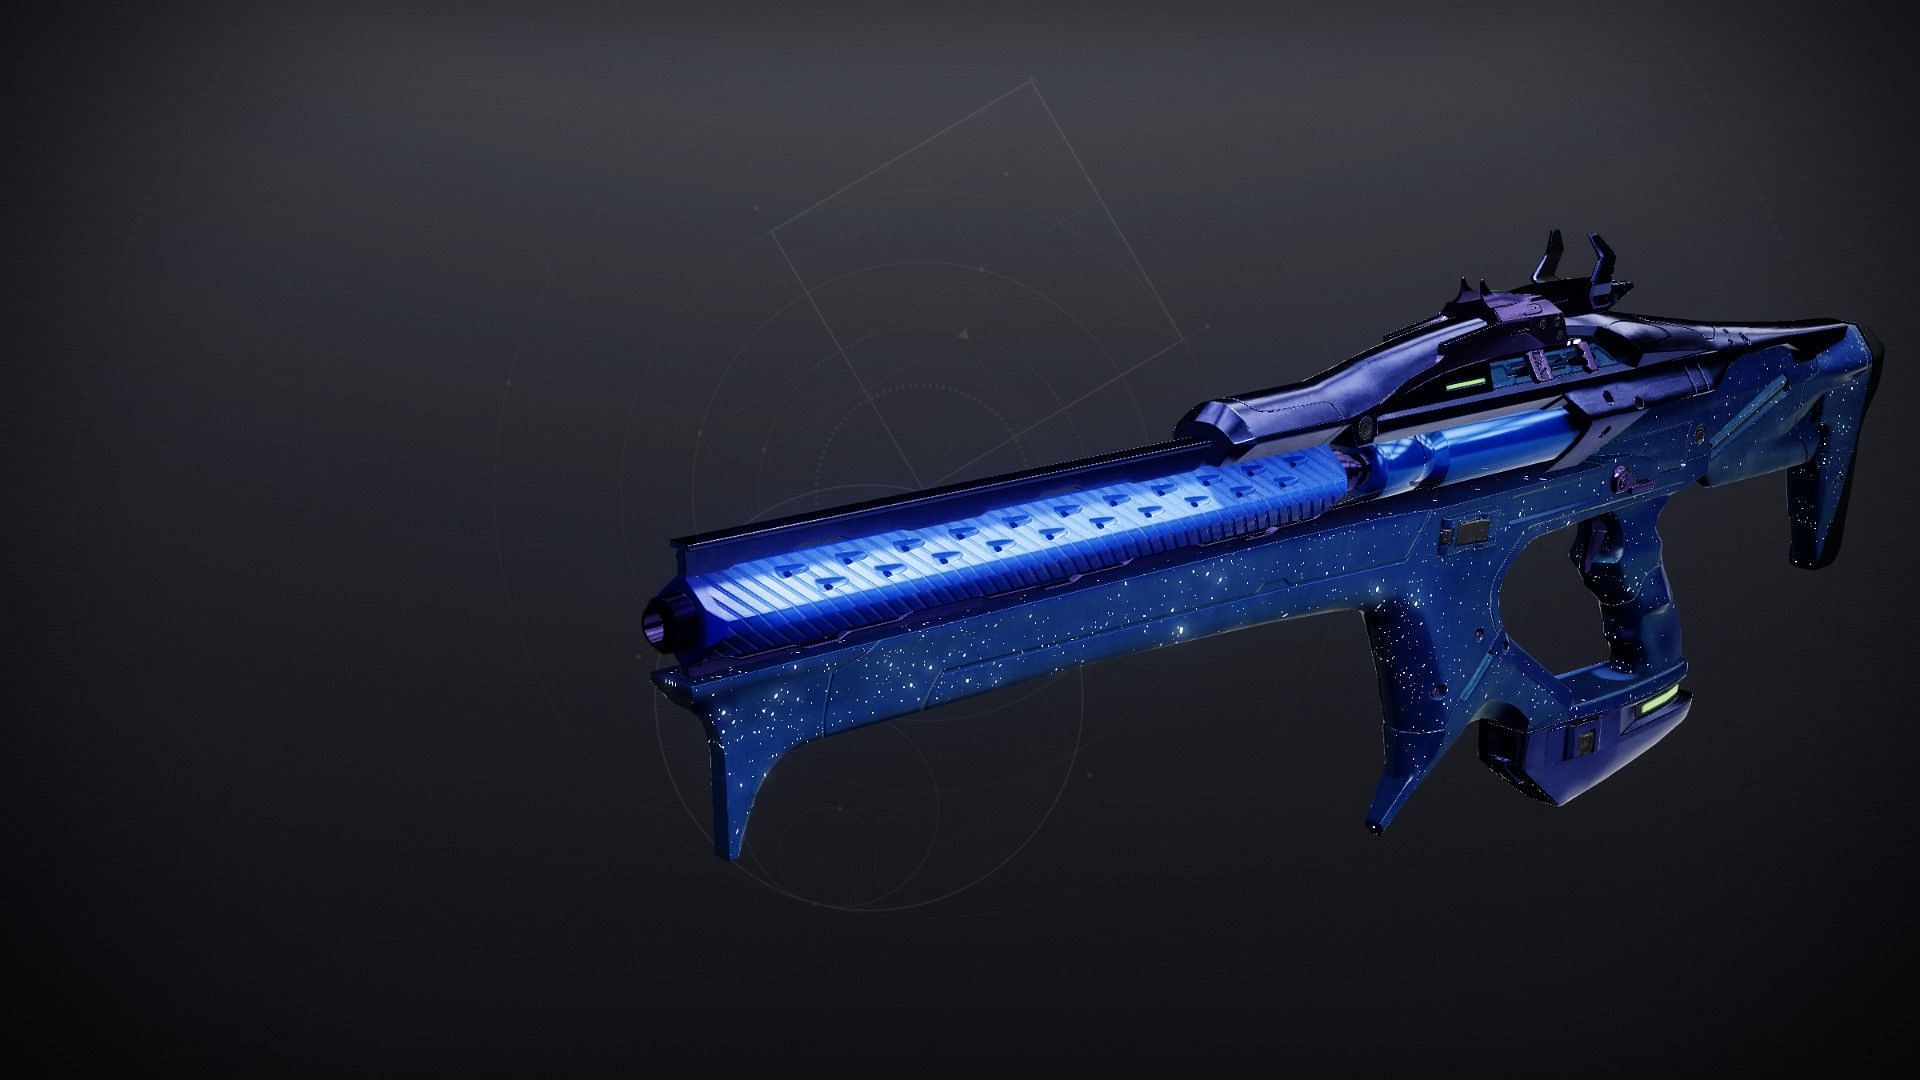 The Scintillation Linear Fusion Rifle (Image via Bungie)